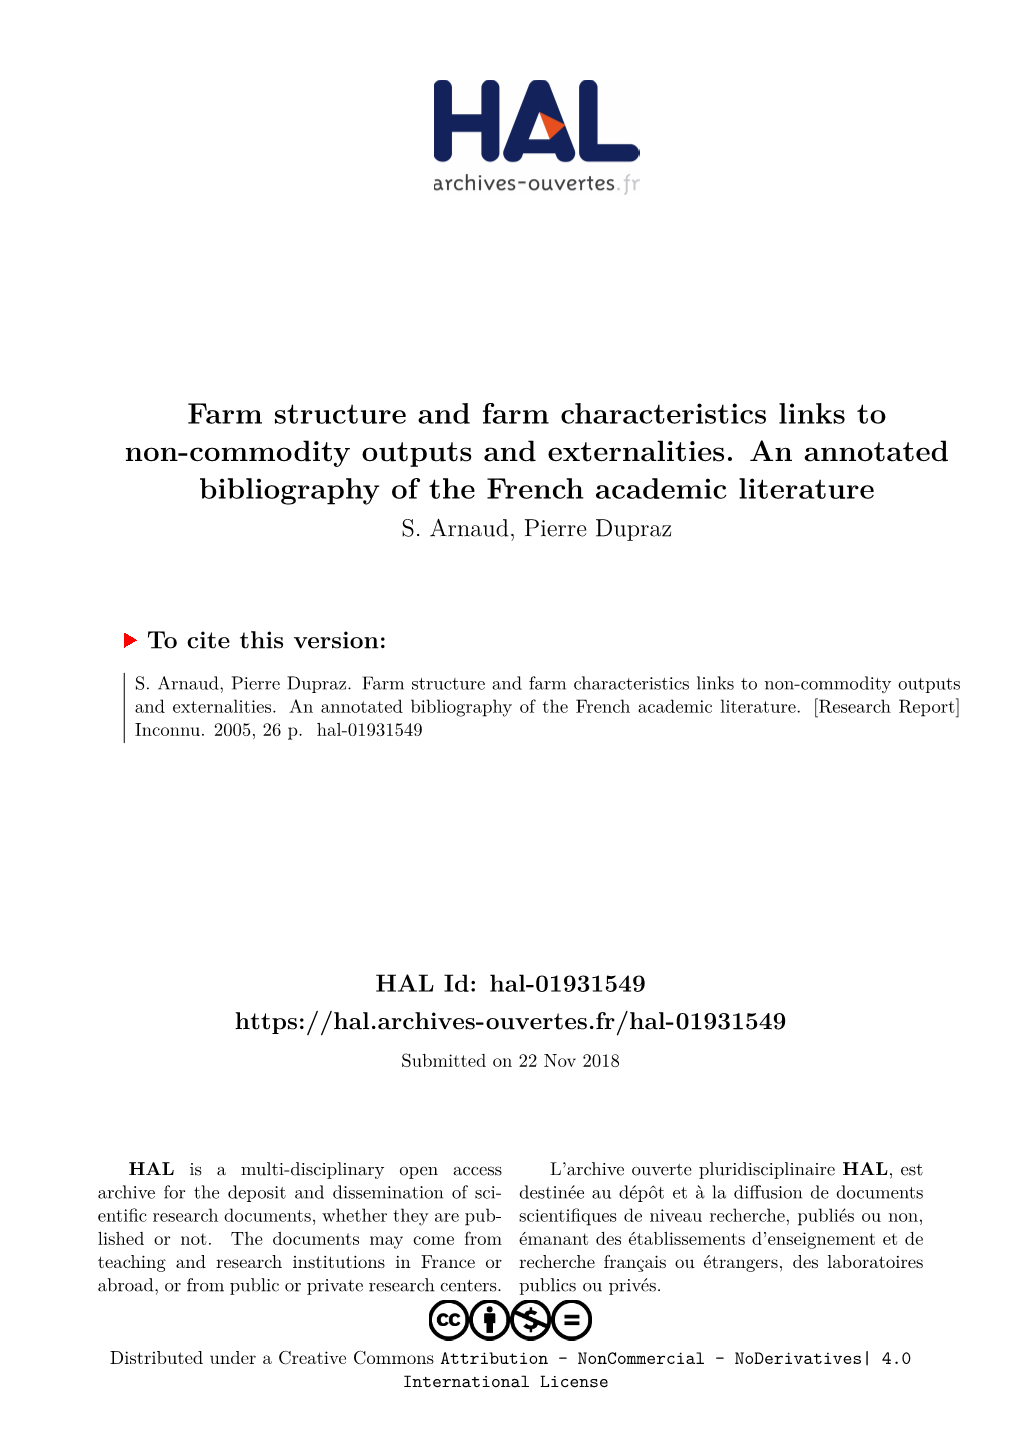 Farm Structure and Farm Characteristics Links to Non-Commodity Outputs and Externalities